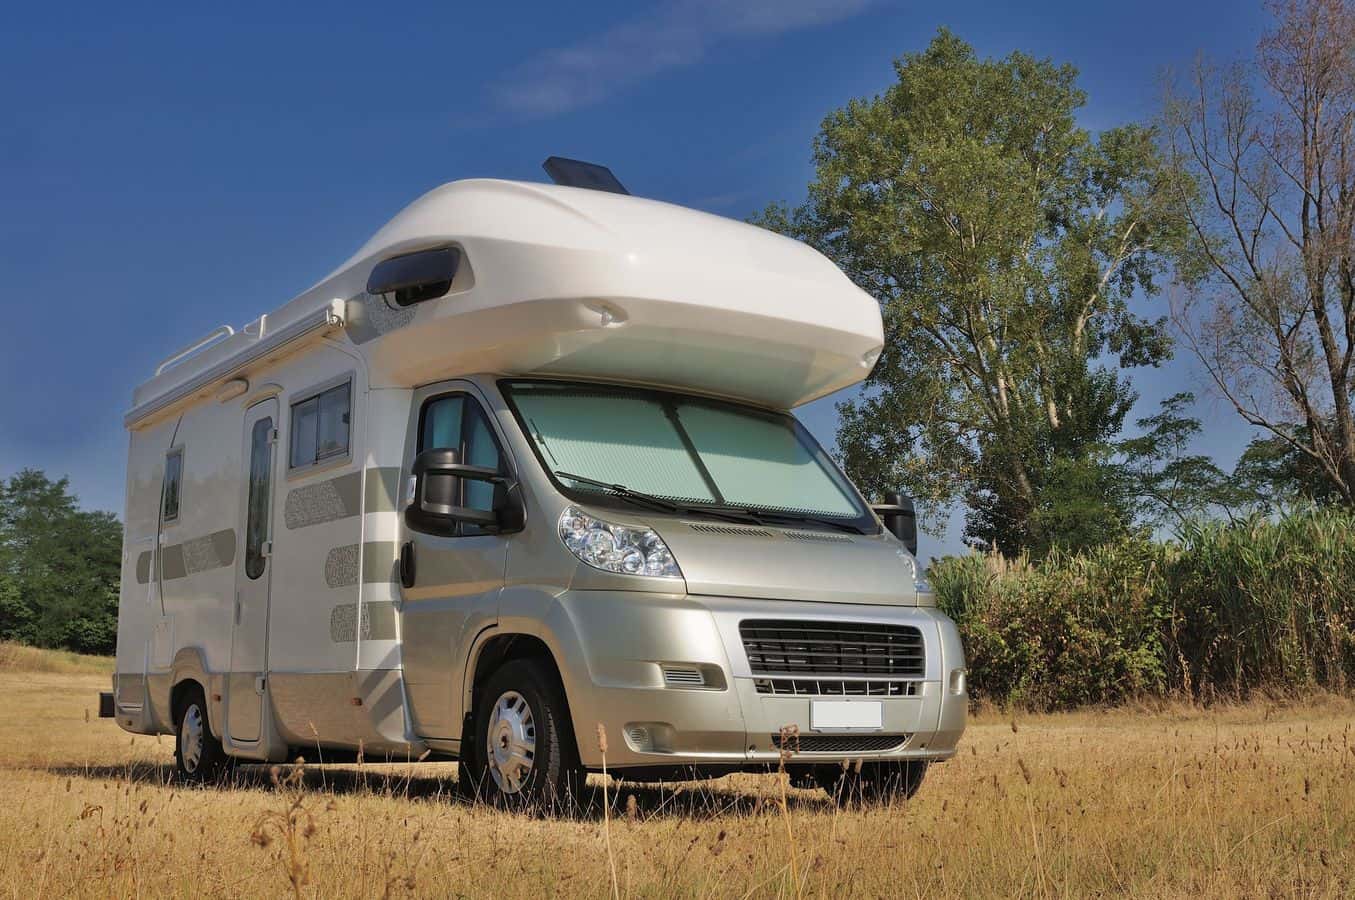 Is An RV Considered a Motorhome?